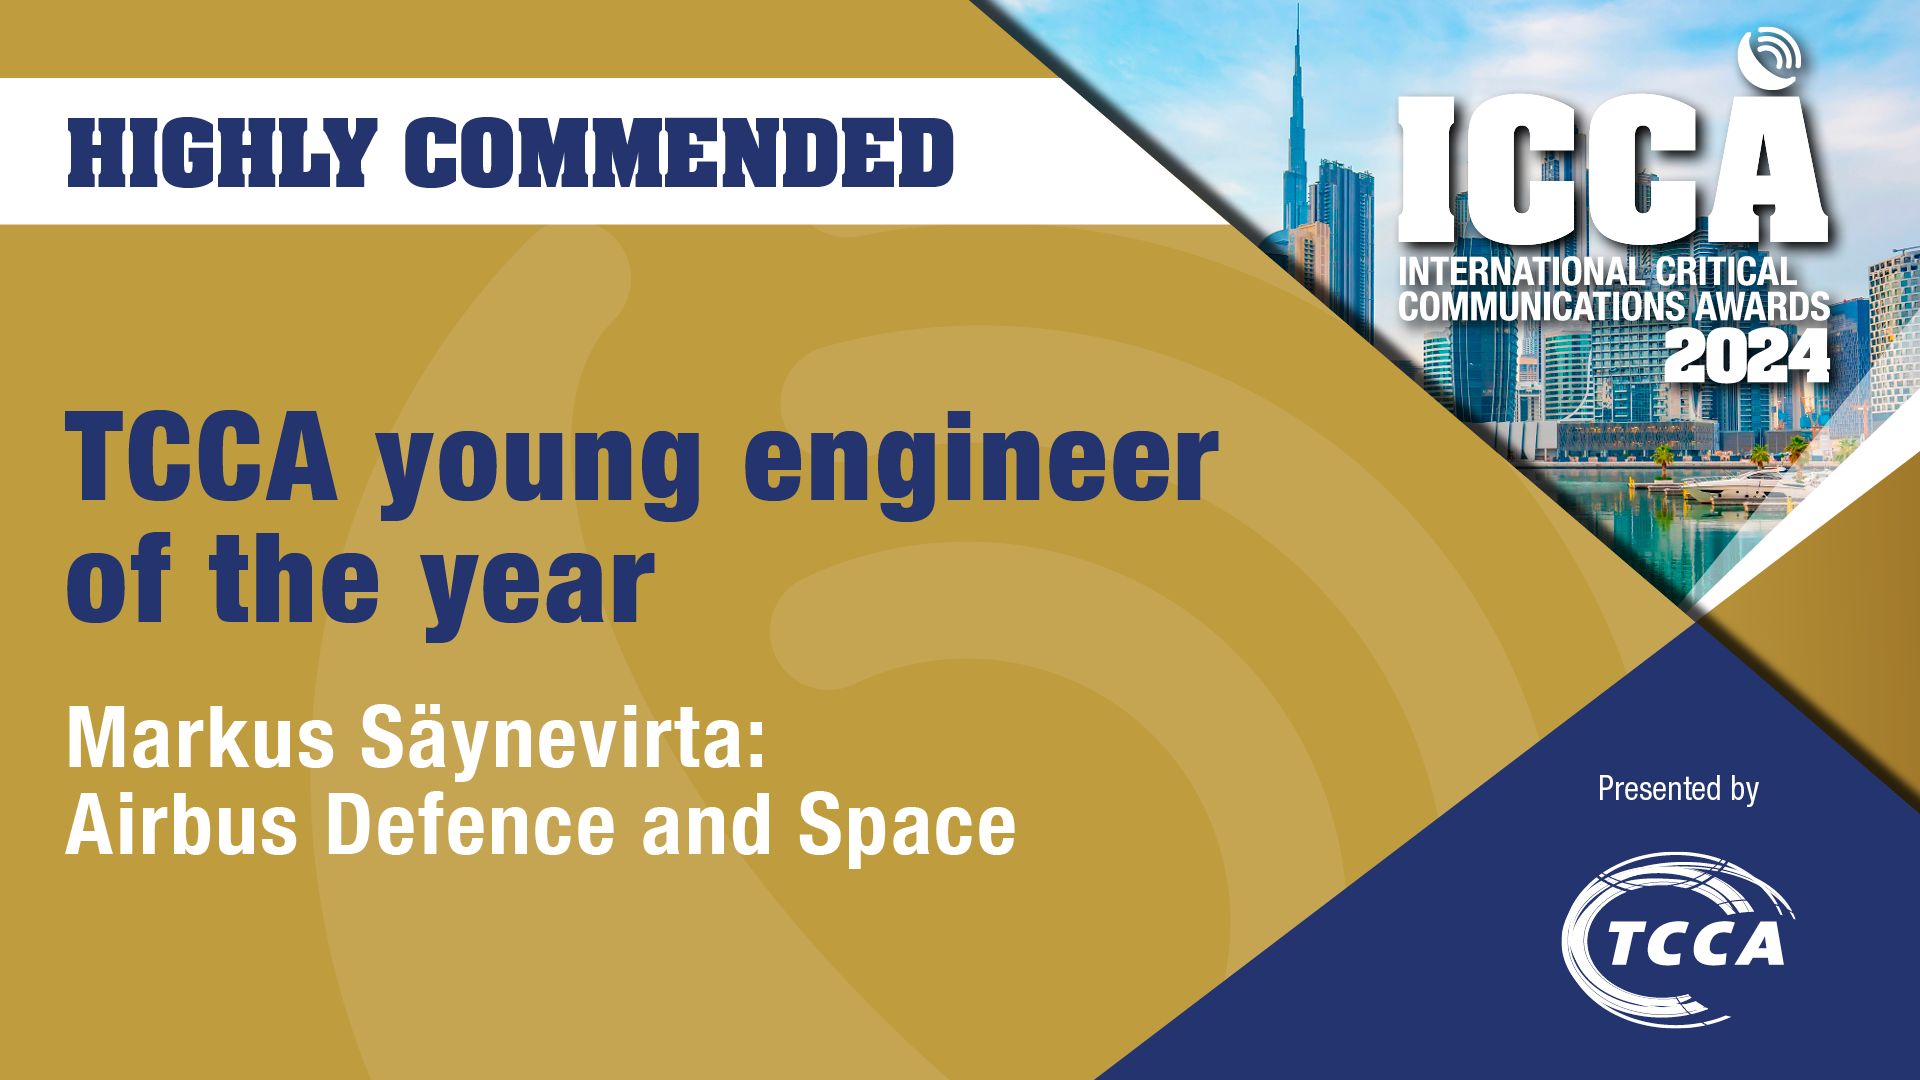 Logo TCCA young engineer of the year ICCA Awards 2024-2